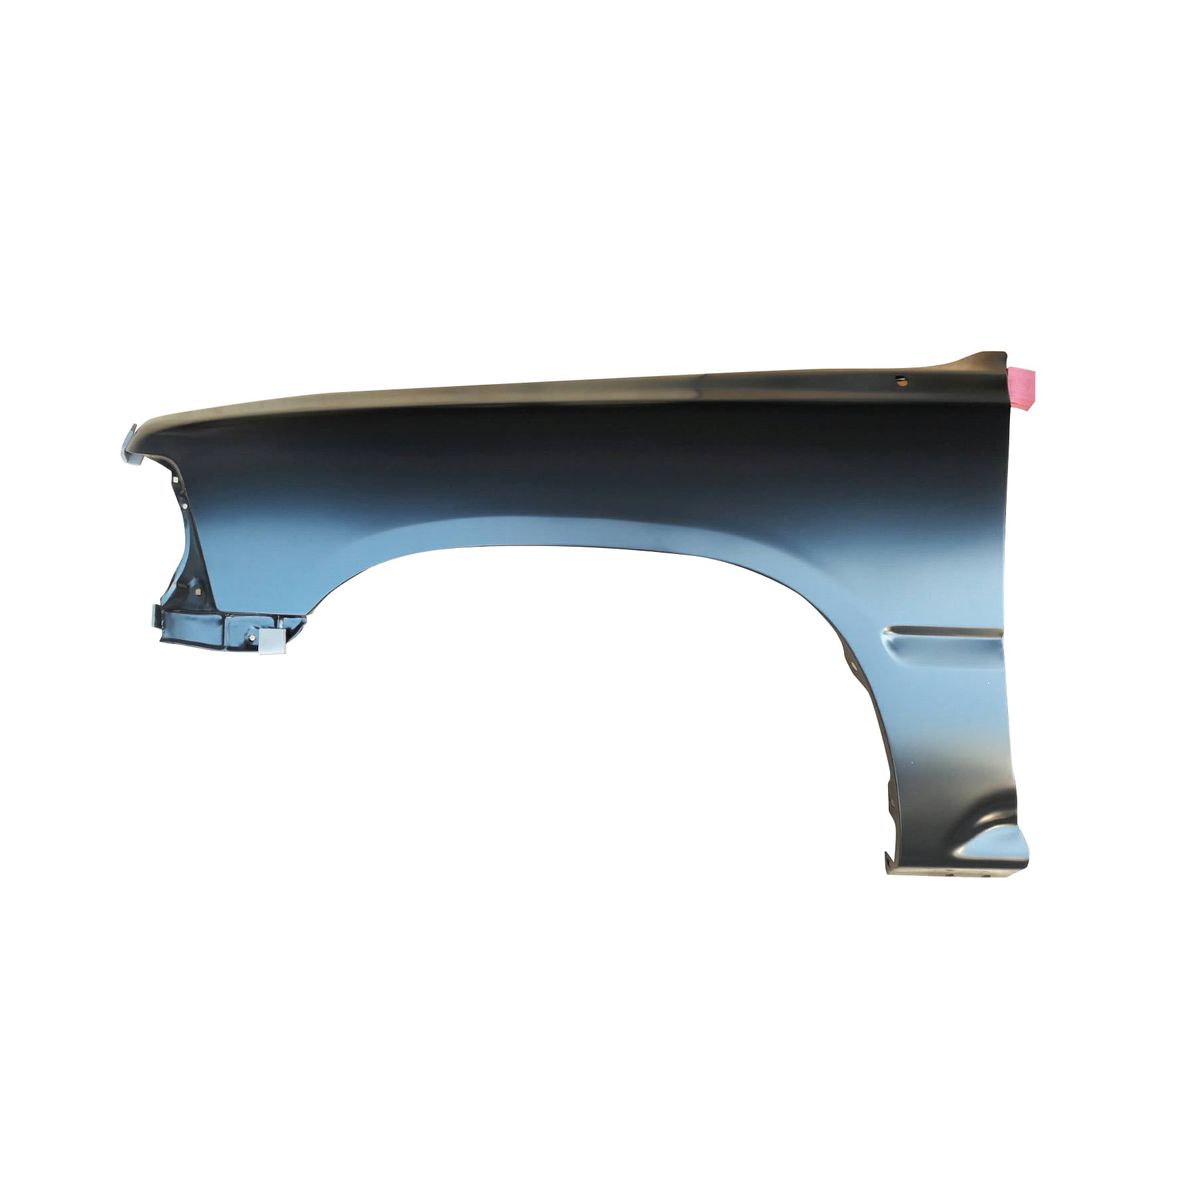 New Front Driver Side Fender For Toyota Pickup 1989-1995 TO1240126